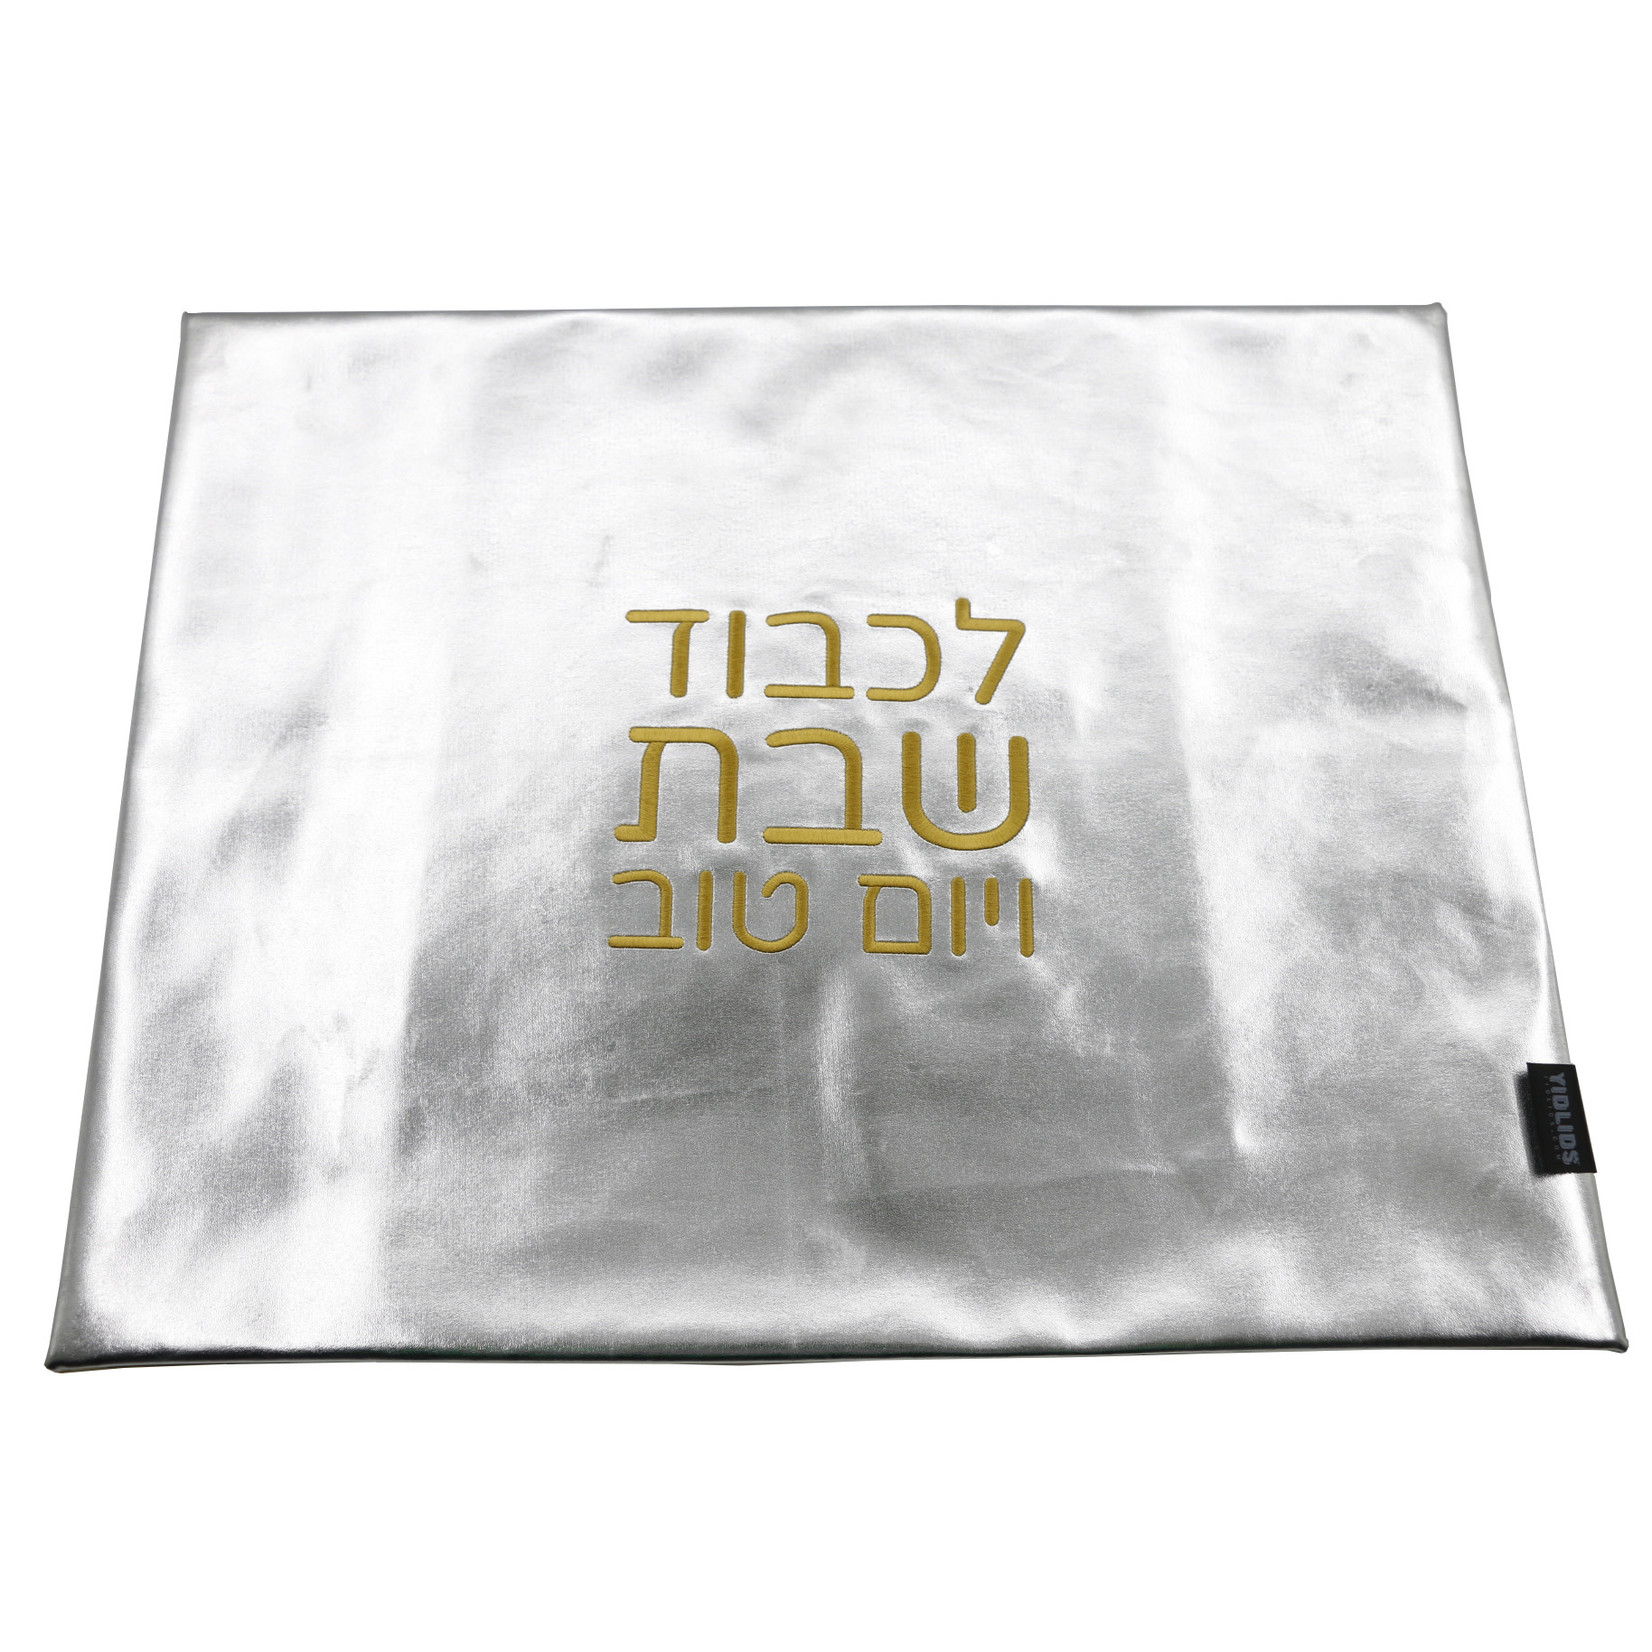 Double-Sided Leatherette Challah Cover, Shiny Silver/Gold